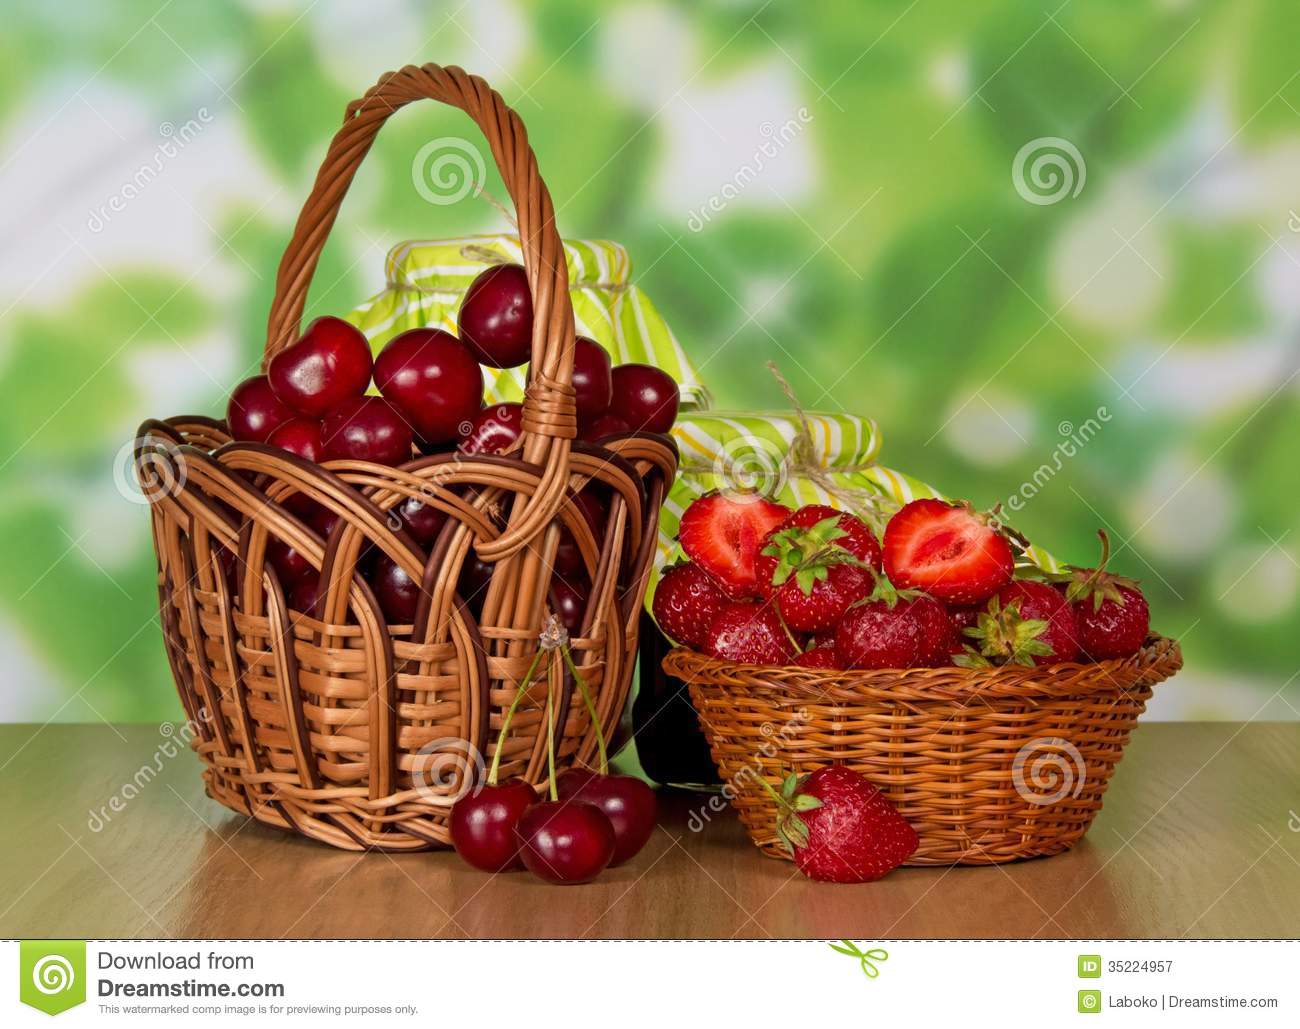     Basket With Sweet Cherries And A Basket With Strawberry On A Table